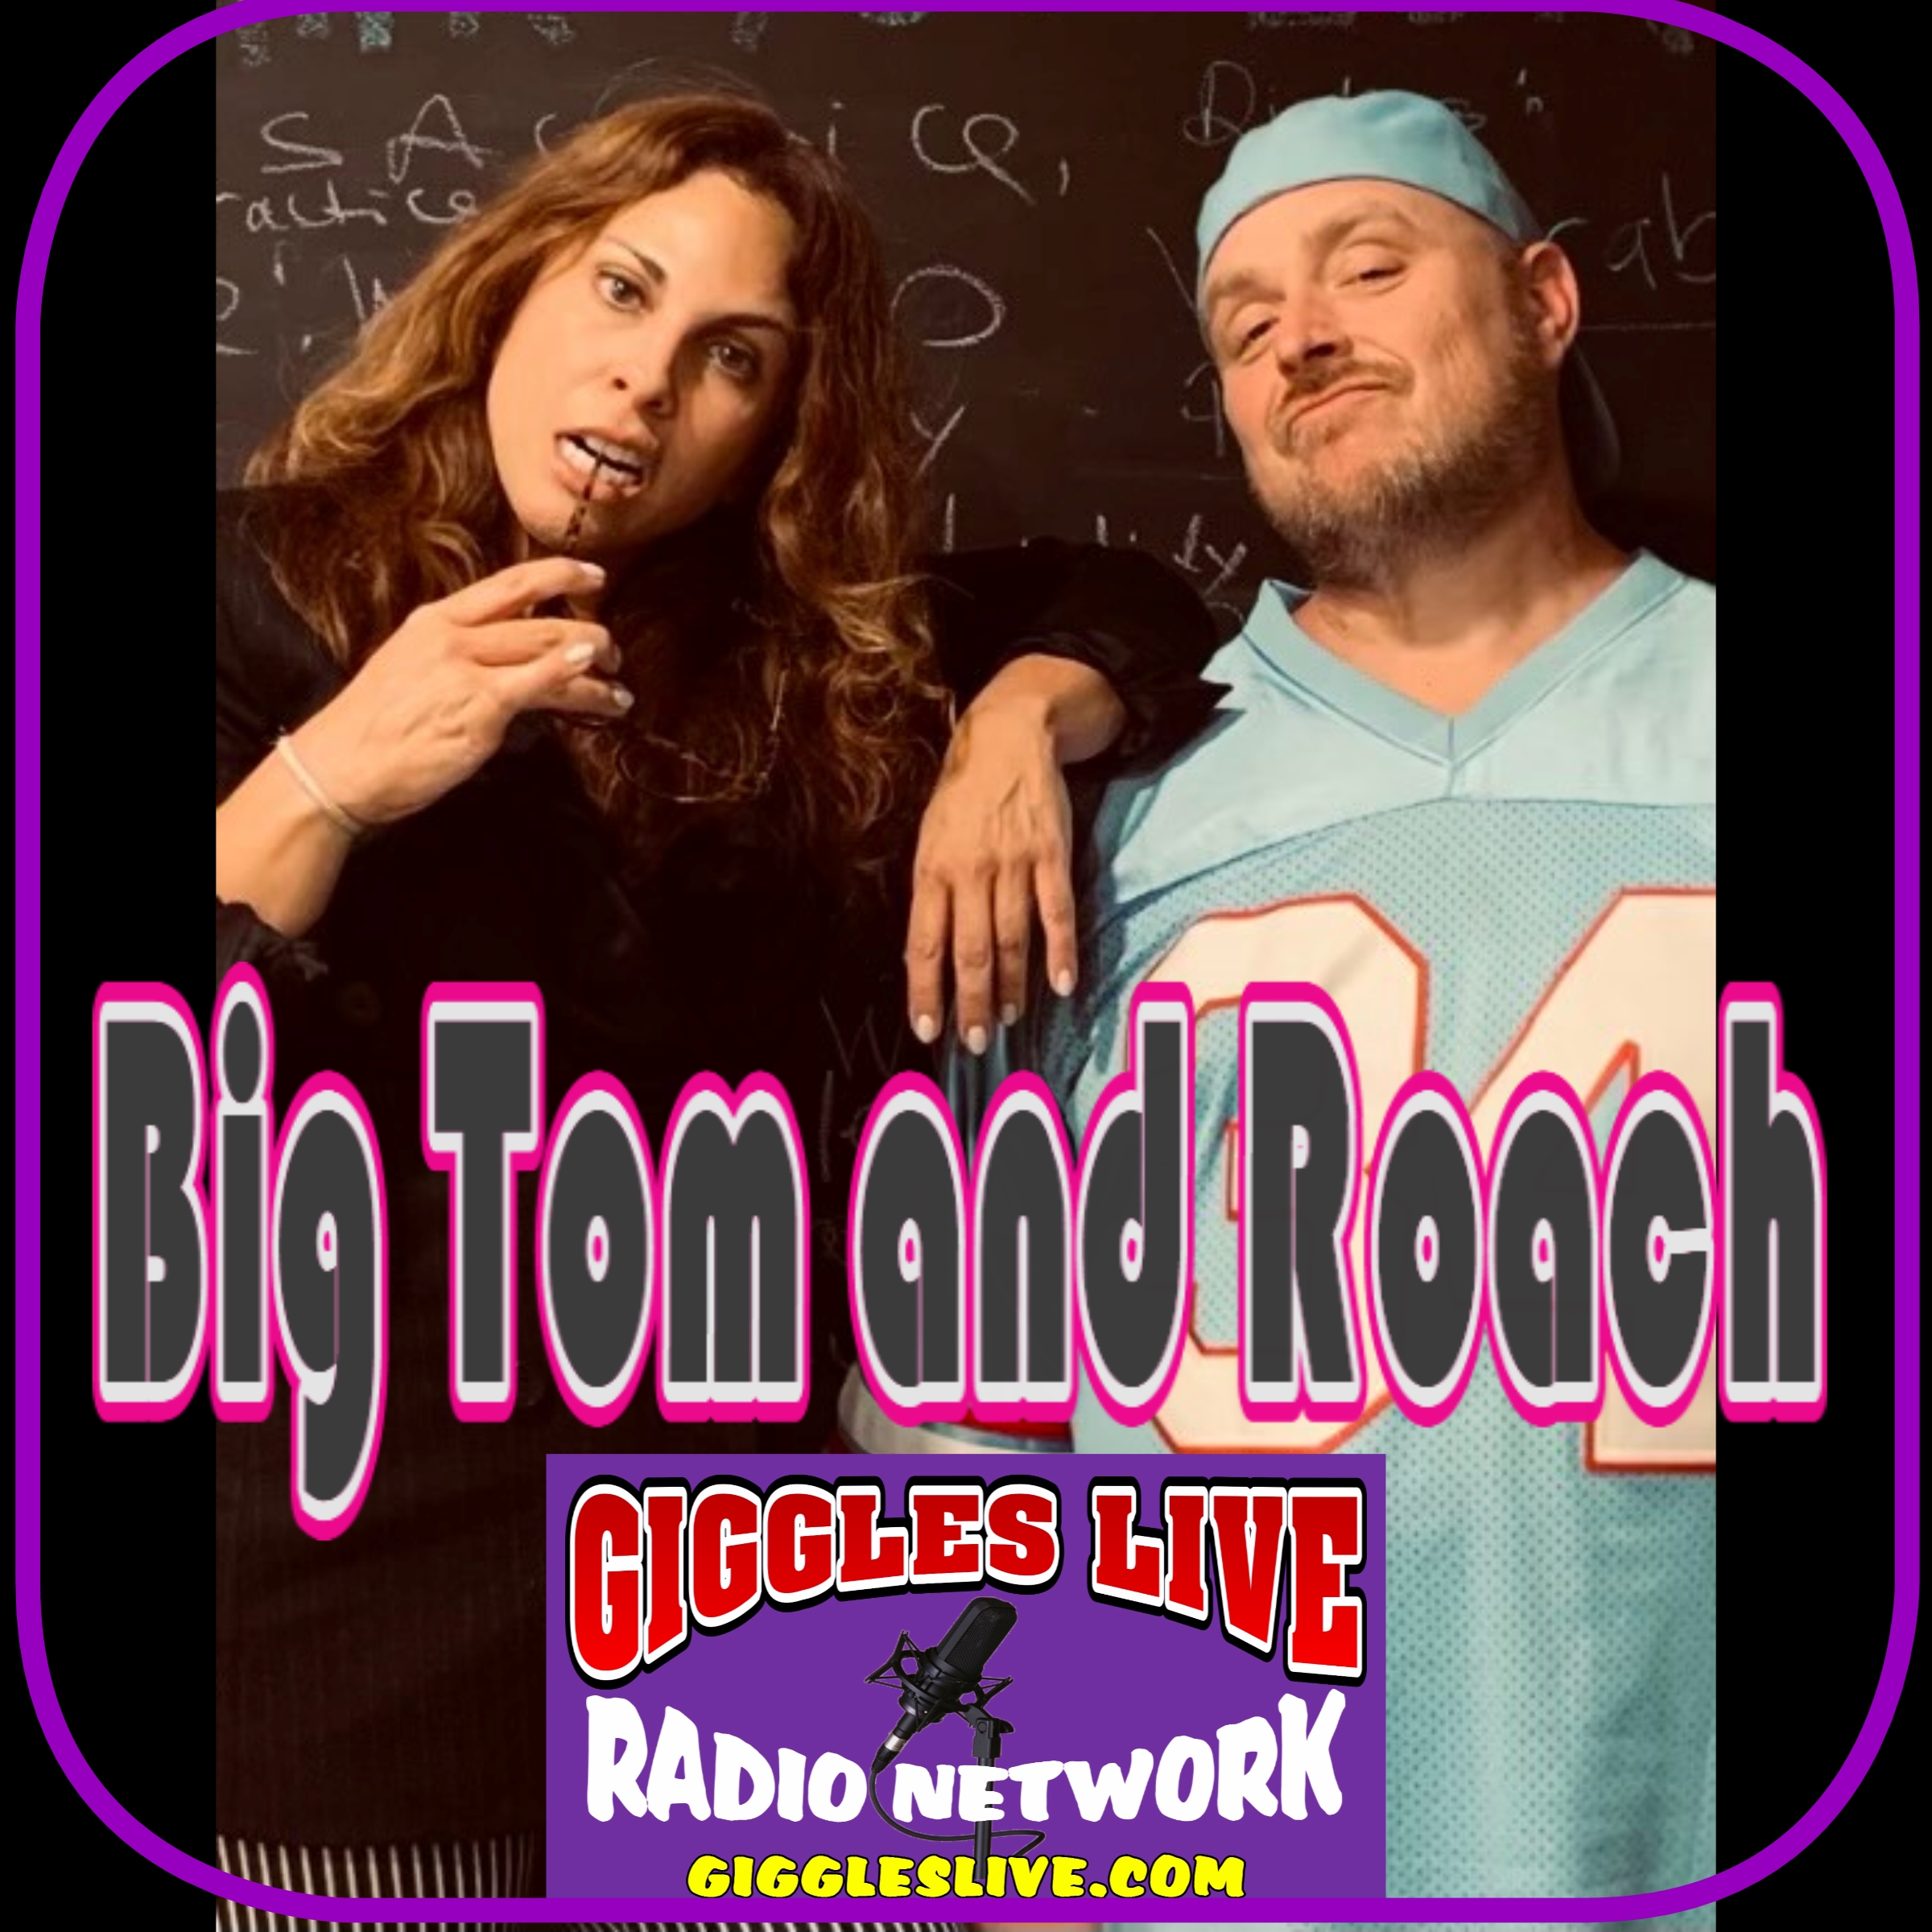 Art for April 19 & 22 2022 Live from the Canyon Club by Big Tom and Roach Back to Back new episodes